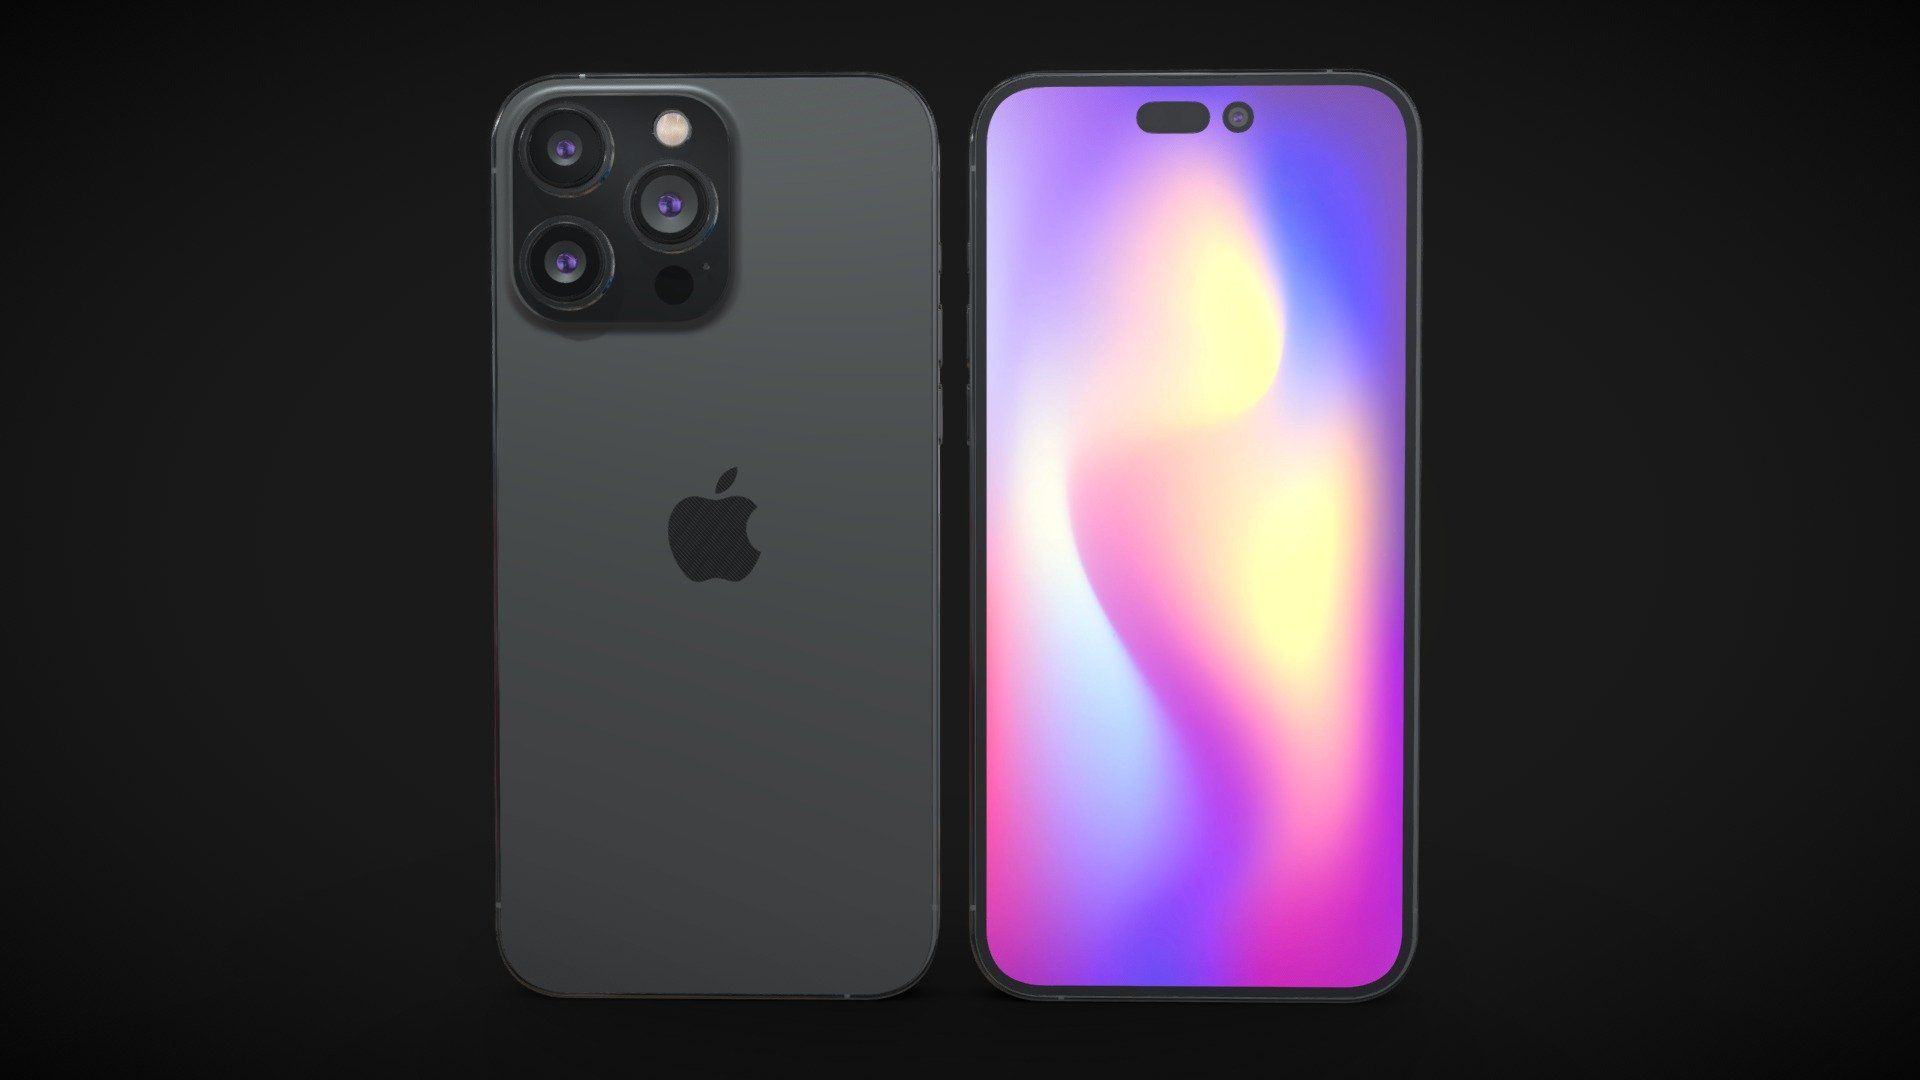 Realistic (copy) 3d model Apple iPhone 14 Pro MAX v1.

This set:




1 file obj standard

1 file 3ds Max 2013 vray material

1 file 3ds Max 2013 corona material

1 file of 3Ds

1 file e3d full set of materials.

1 file cinema 4d standard.

1 file blender cycles.

1 file STL

Topology of geometry:
- forms and proportions of The 3D model
- the geometry of the model was created very neatly
- there are no many-sided polygons
- detailed enough for close-up renders
- the model optimized for turbosmooth modifier
- Not collapsed the turbosmooth modified
- apply the Smooth modifier with a parameter to get the desired level of detail

Organization of scene:
- to all objects and materials
- real world size (system units - mm)
- coordinates of location of the model in space (x0, y0, z0)
- does not contain extraneous or hidden objects (lights, cameras, shapes etc.) - Apple iPhone 14 Pro MAX v1 - Buy Royalty Free 3D model by madMIX 3d model